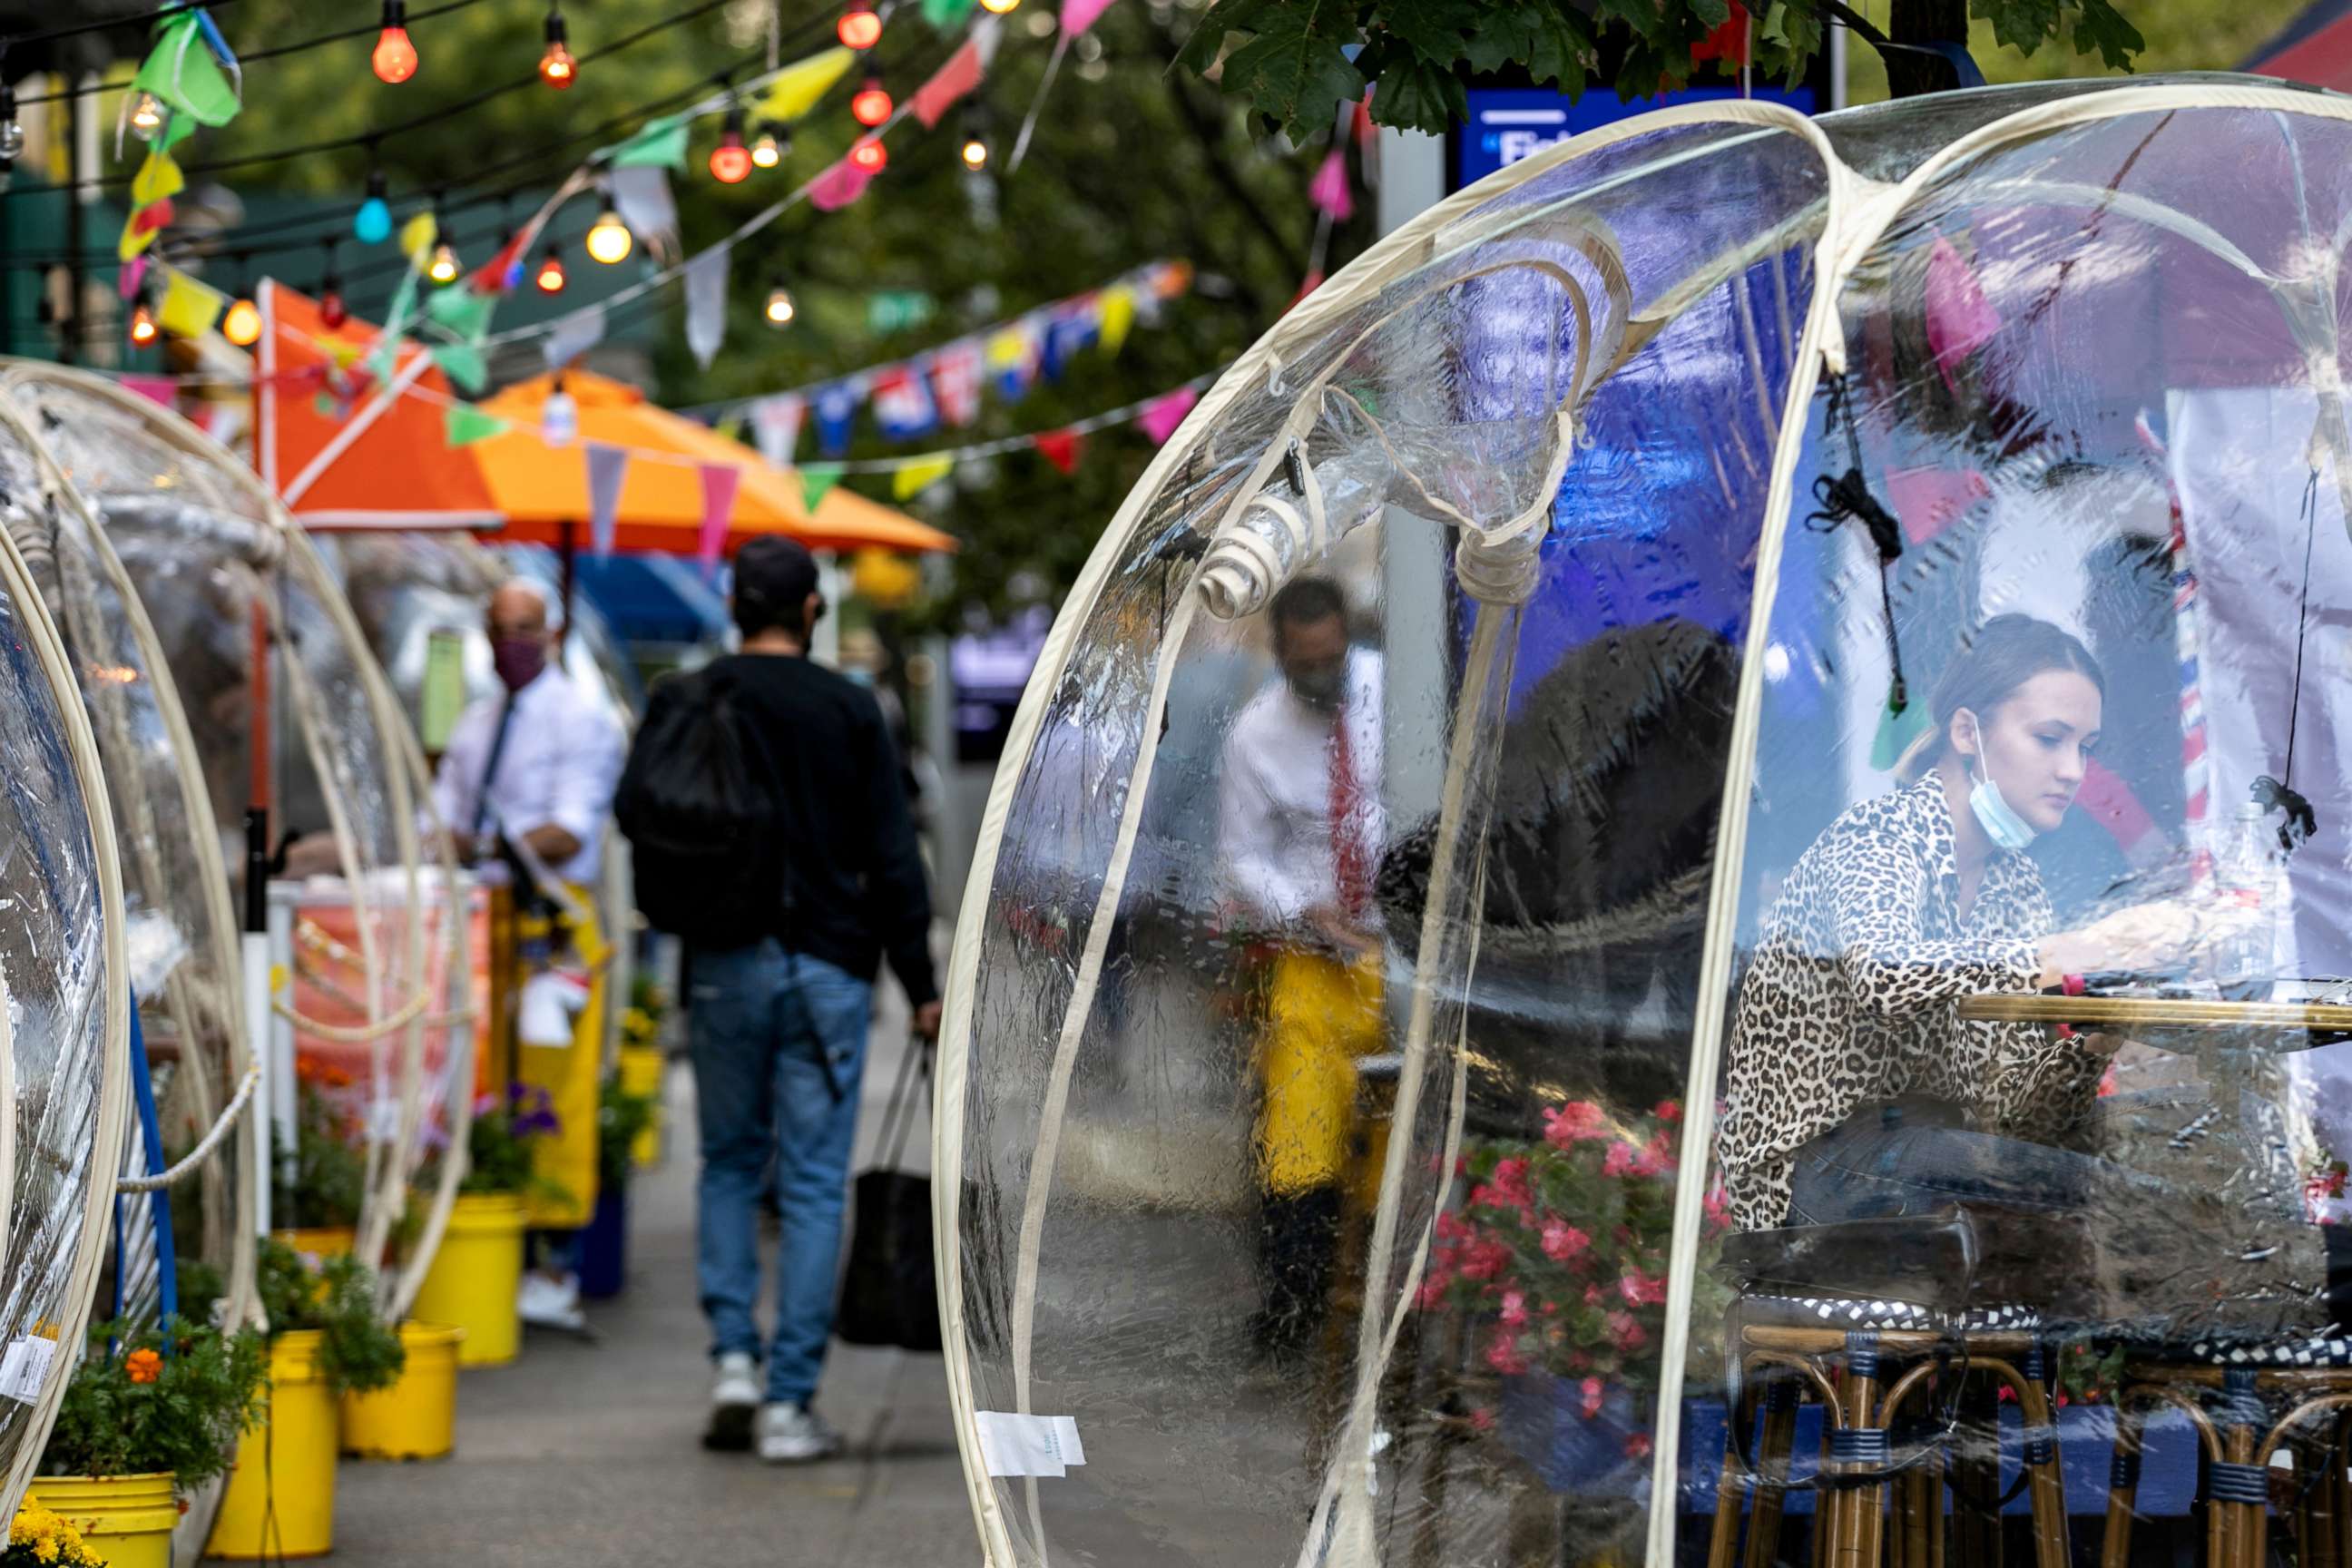 FILE PHOTO: A woman sits outside Cafe Du Soleil under bubble tents used during the novel coronavirus pandemic in Manhattan, New York City, on Sept. 23, 2020.